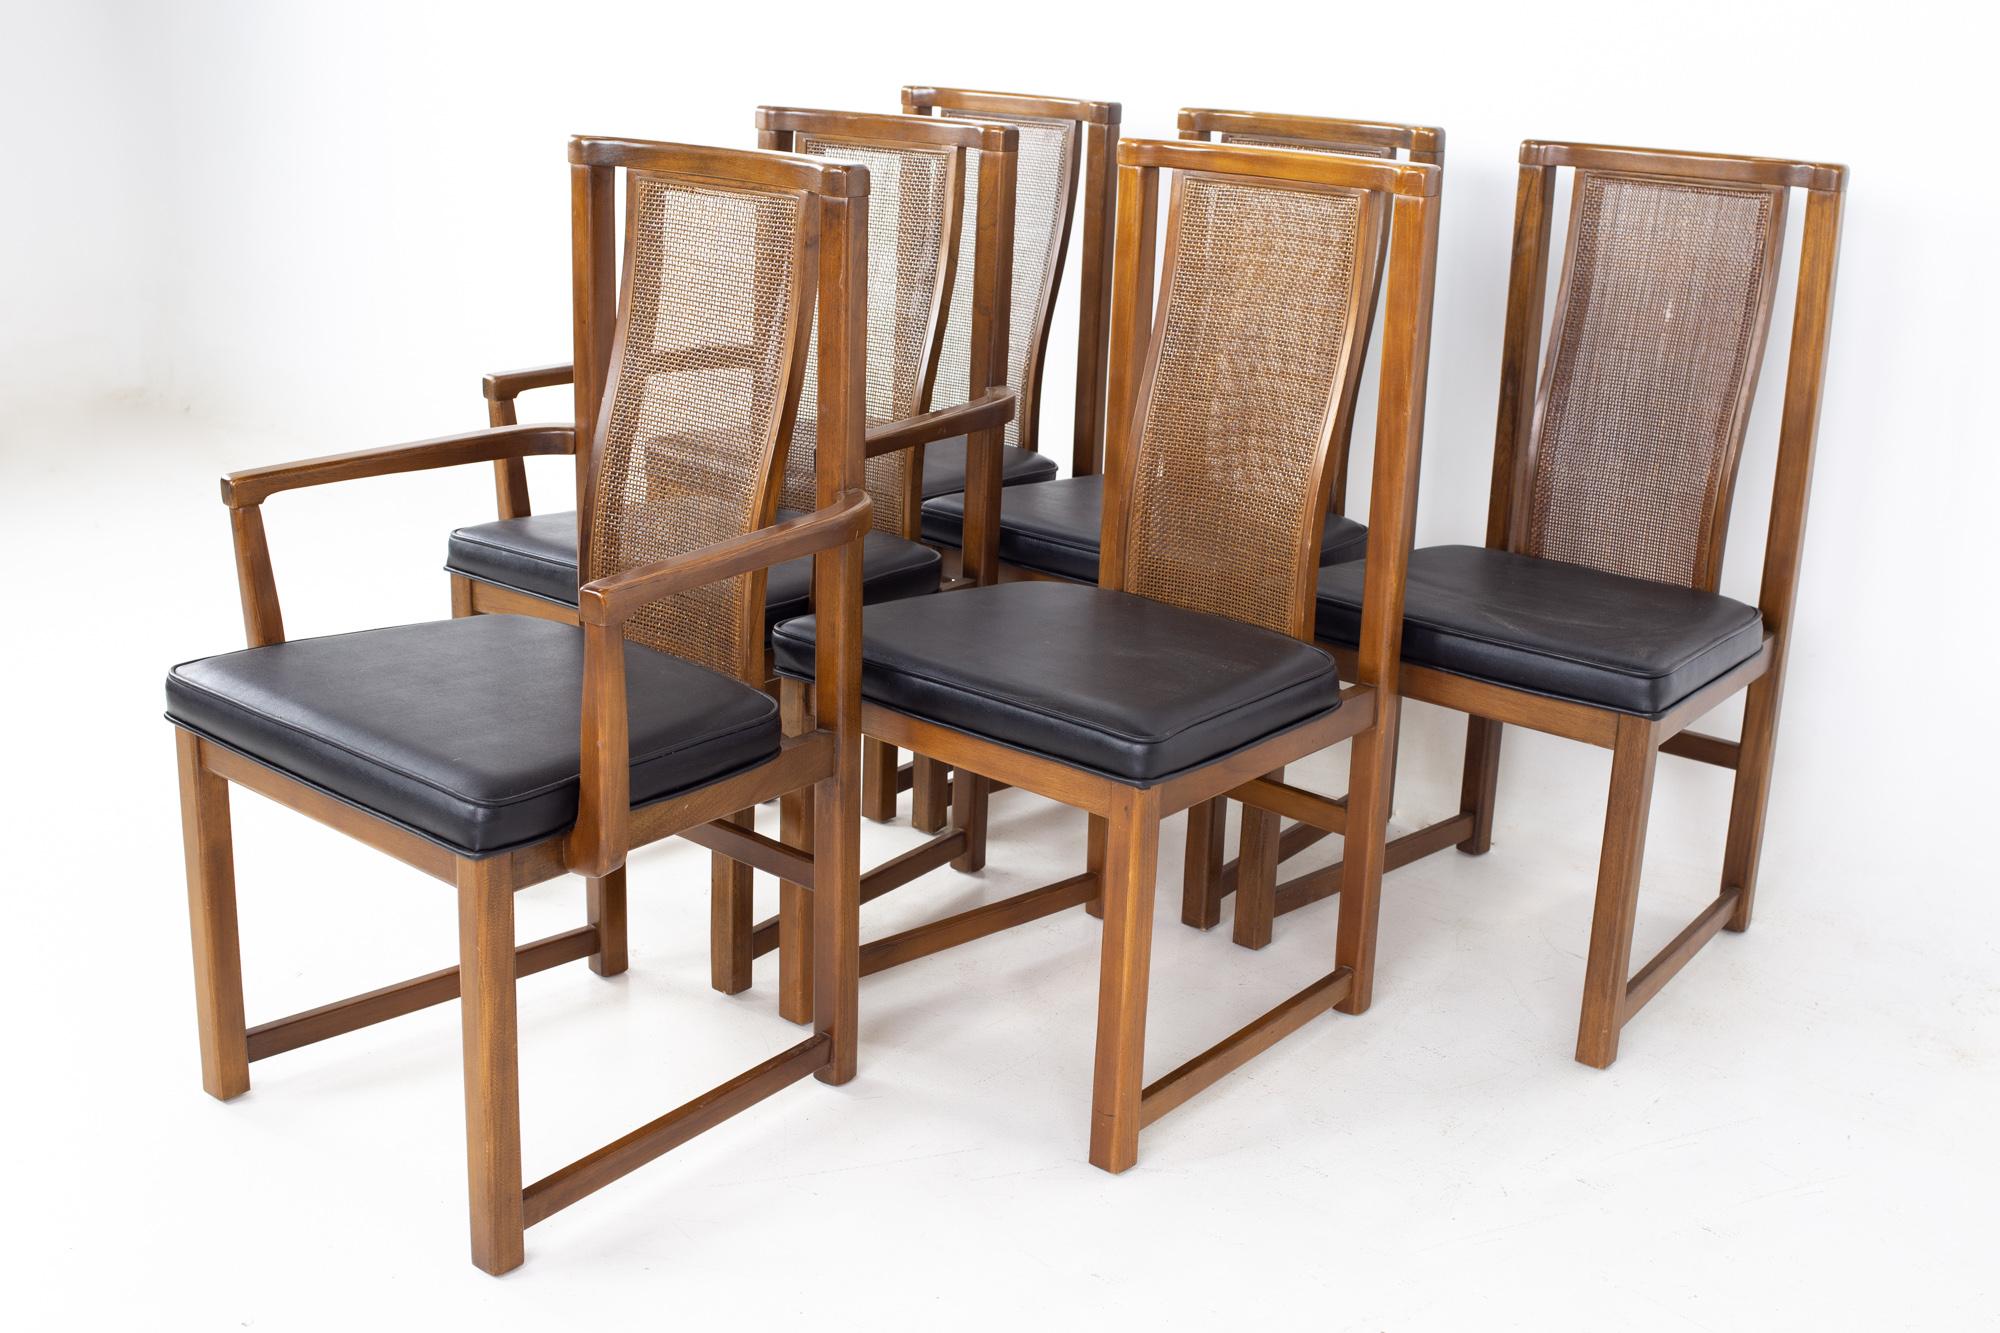 Mid century walnut and cane dining chairs - set of 6
Each chair measures: 24 wide x 20.5 deep x 38.25 high, with a seat height of 18 inches and arm height of 25.5 inches 

All pieces of furniture can be had in what we call restored vintage